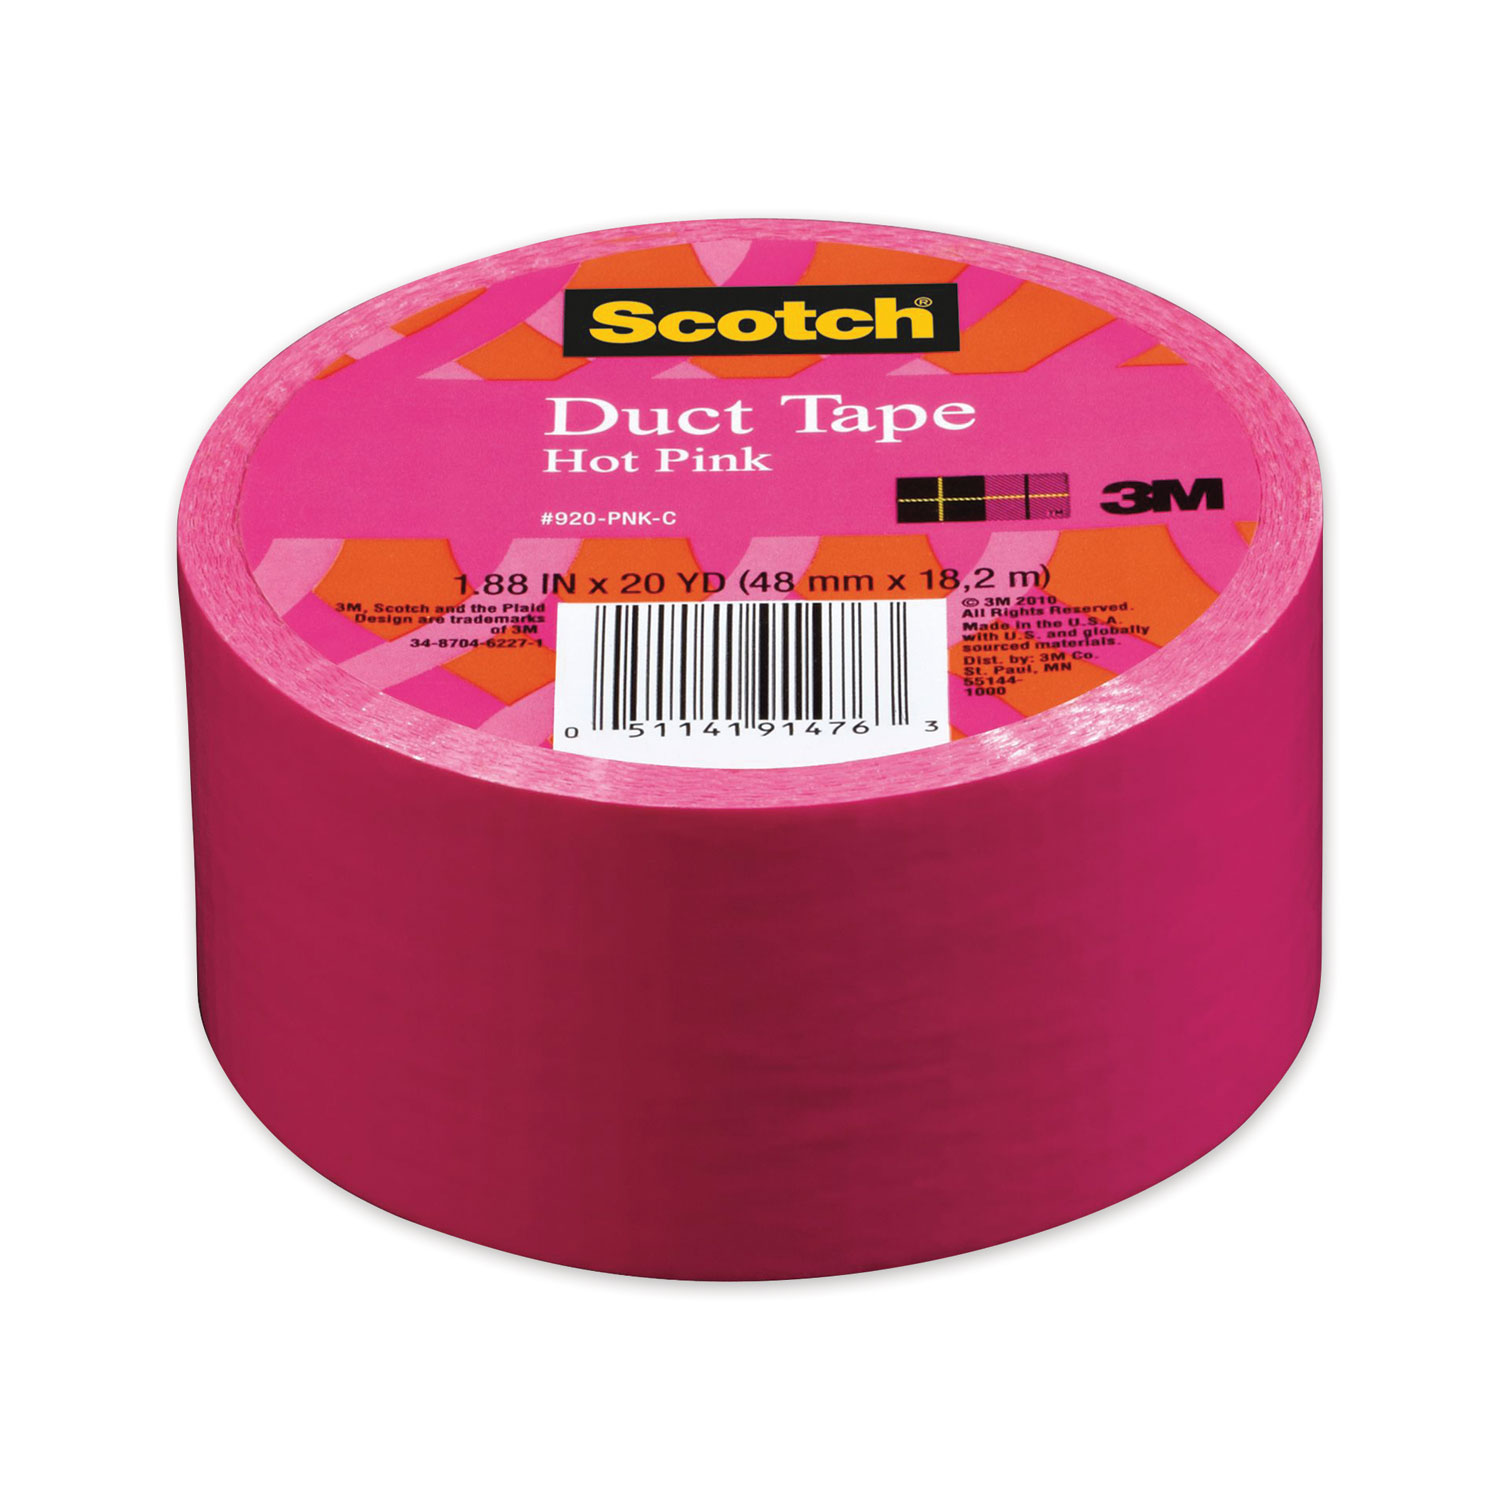 Scotch® Duct Tape, 1.88 x 20 yds, Hot Pink